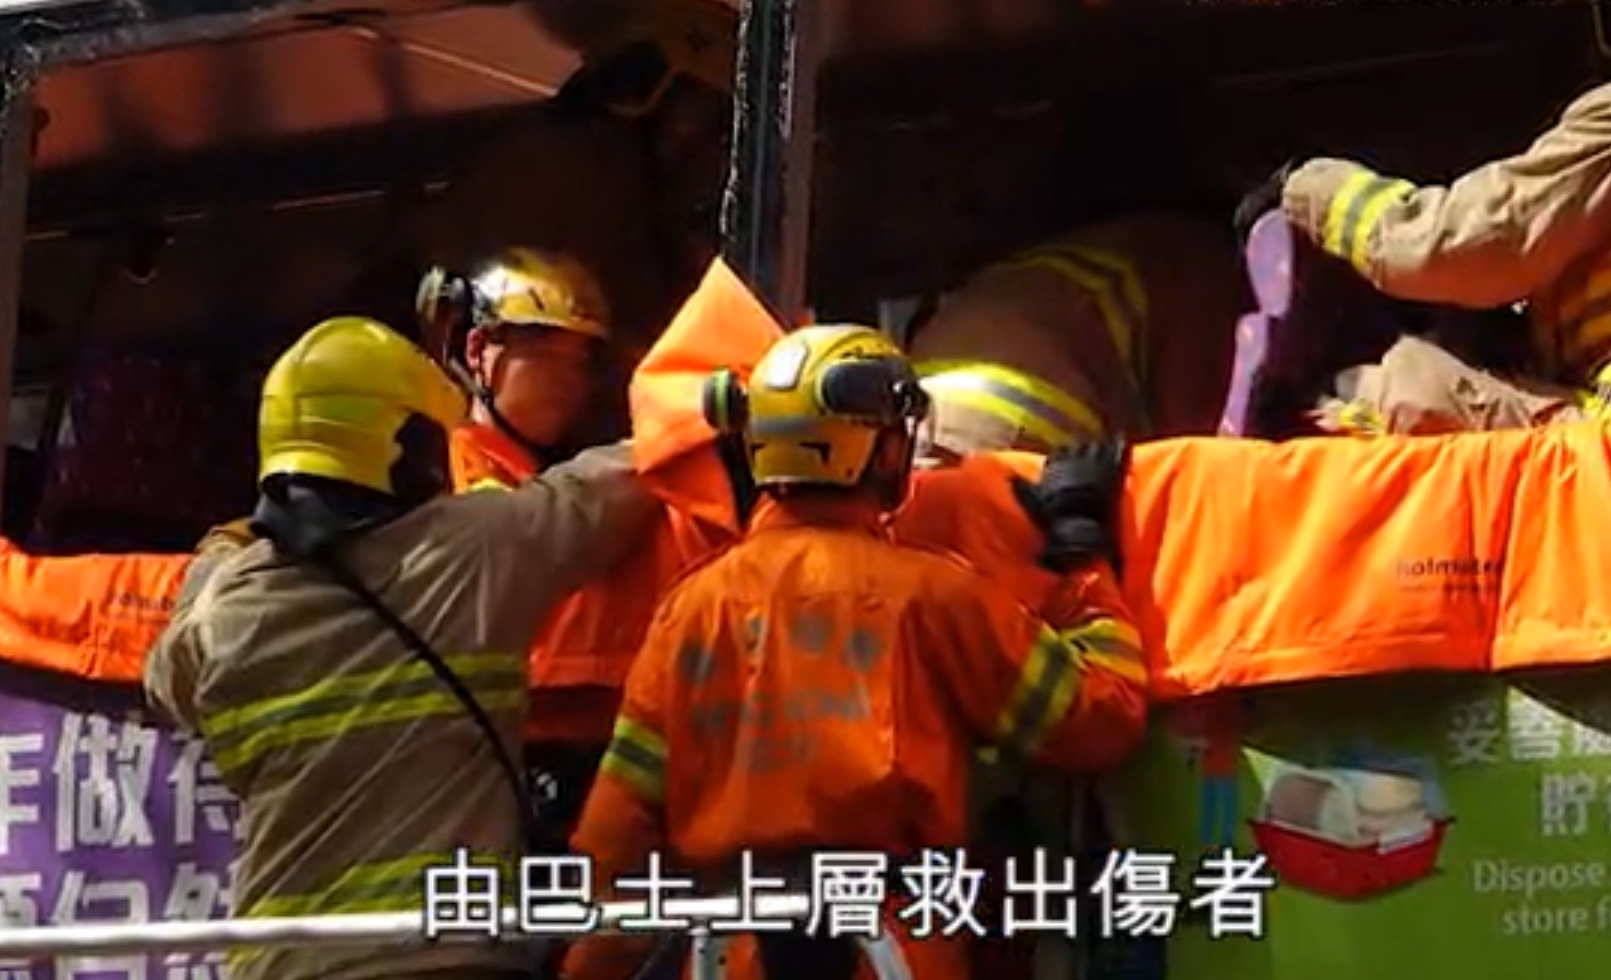 Firefighters help people out of the upper level of a double-decker bus involved in a crash in the New Territories today. Screengrab via Apple Daily video.